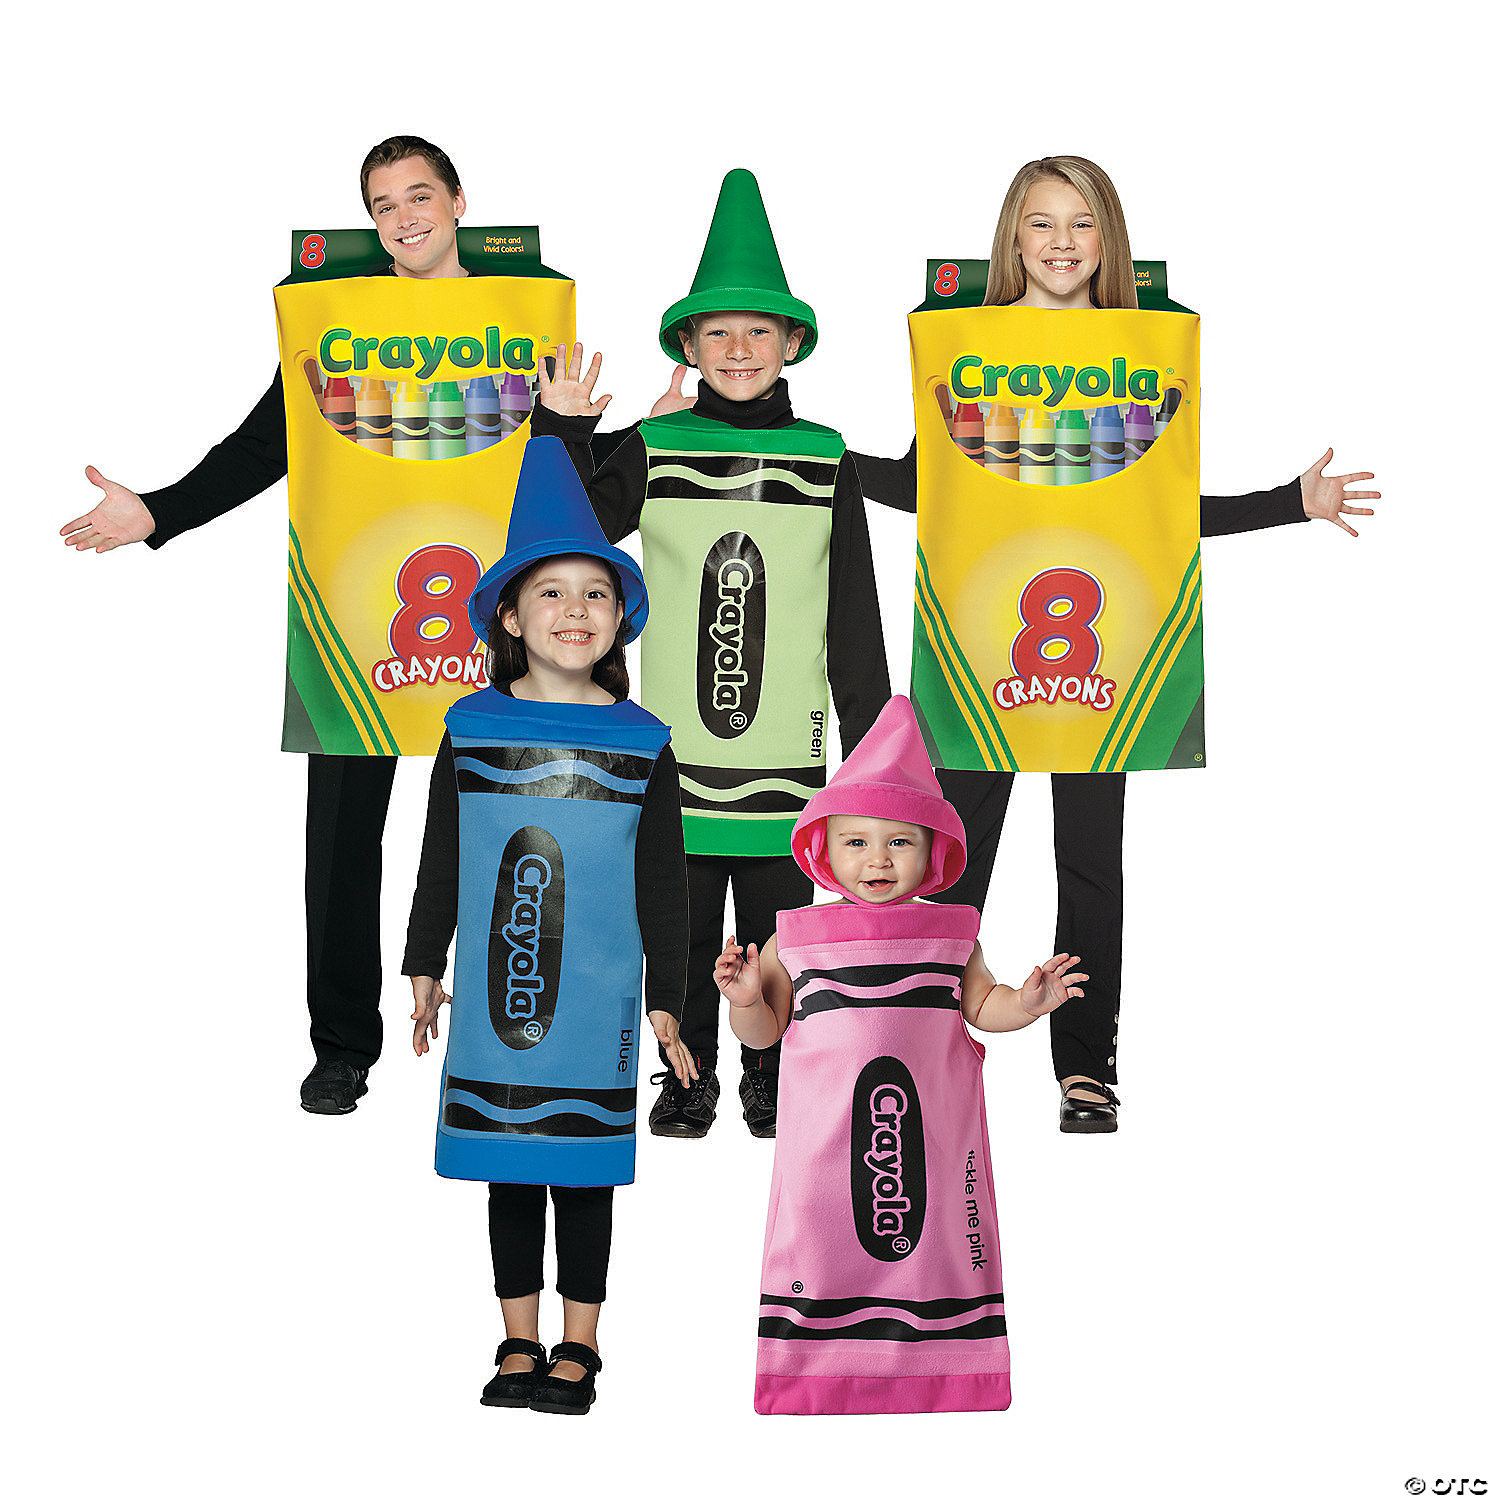 NW Crayola Crayon Childs CostumeS RED,PURPLE,BLUE FRE SHIPING W/BUY IT NOW PRICE 